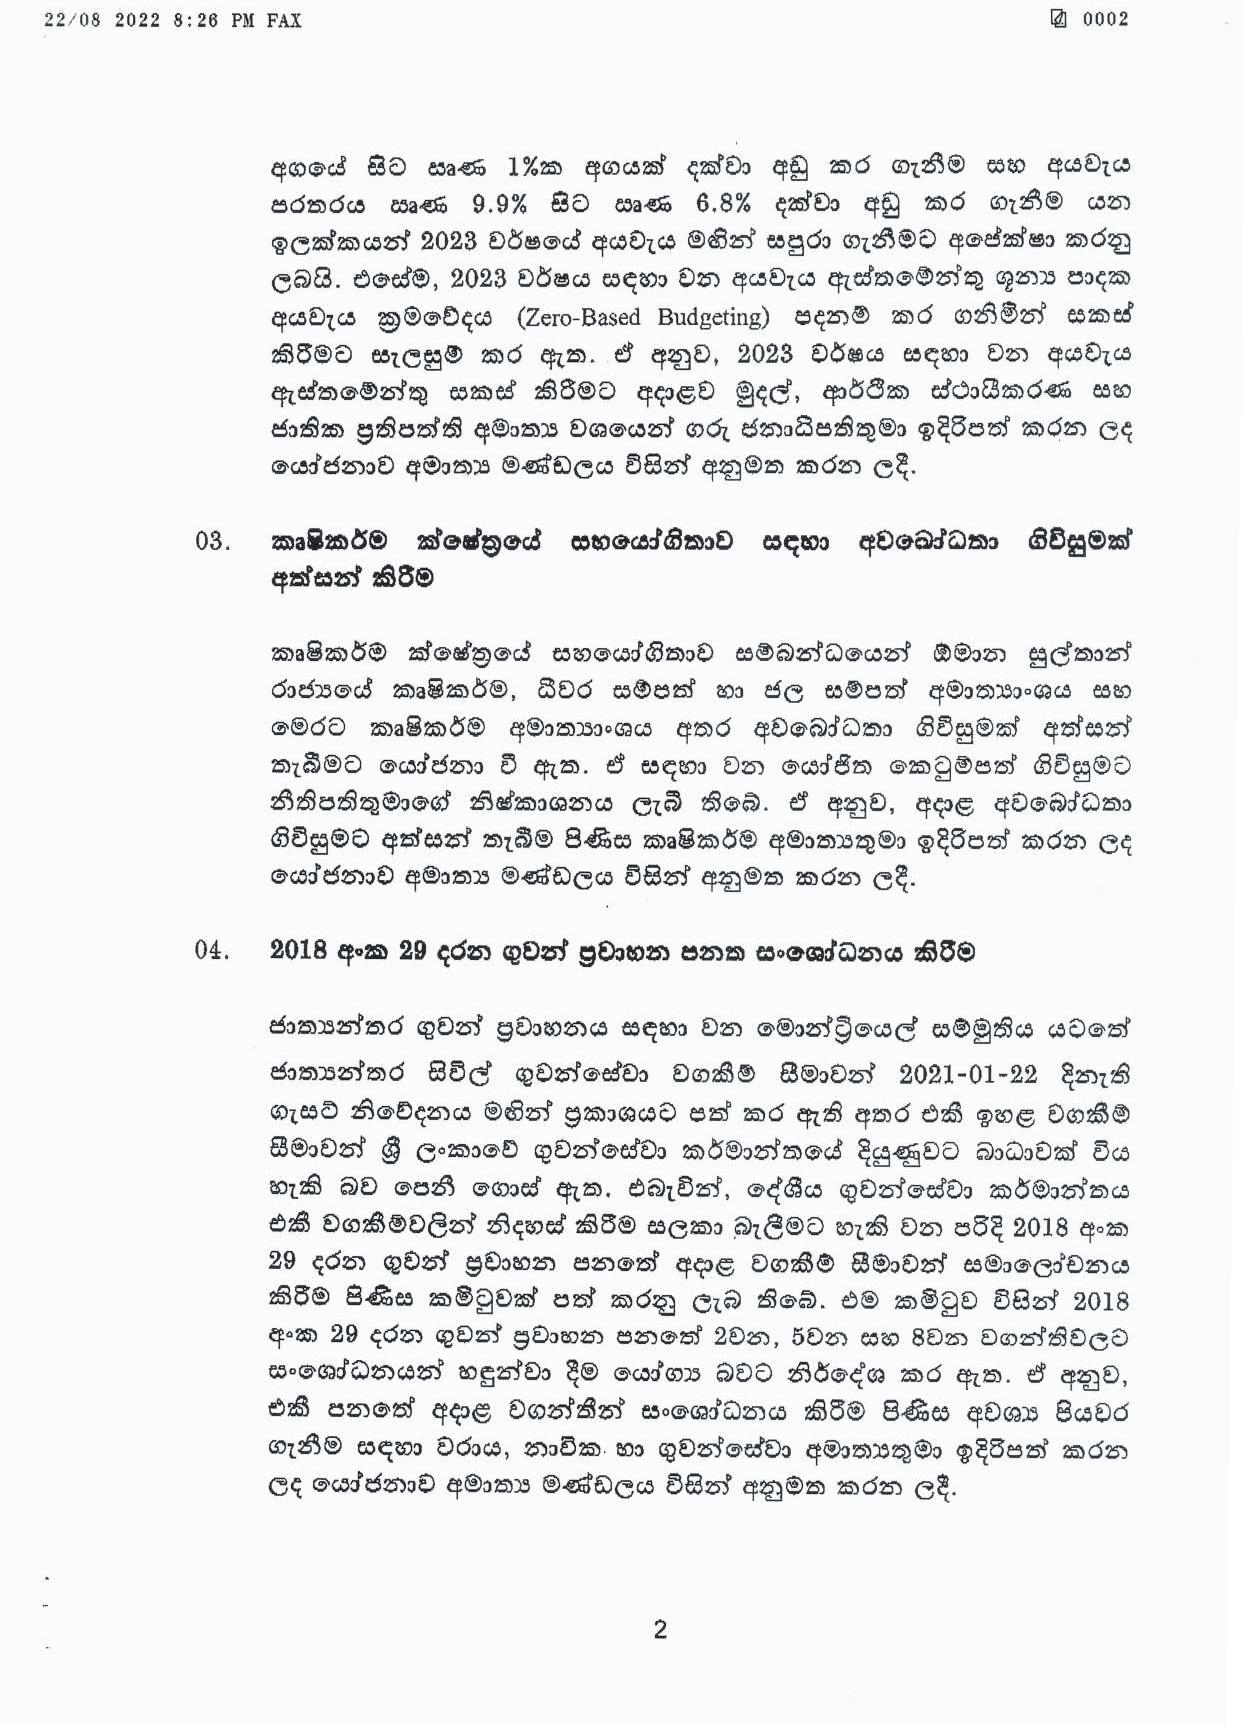 Cabinet decision on 22.08.2022 page 002